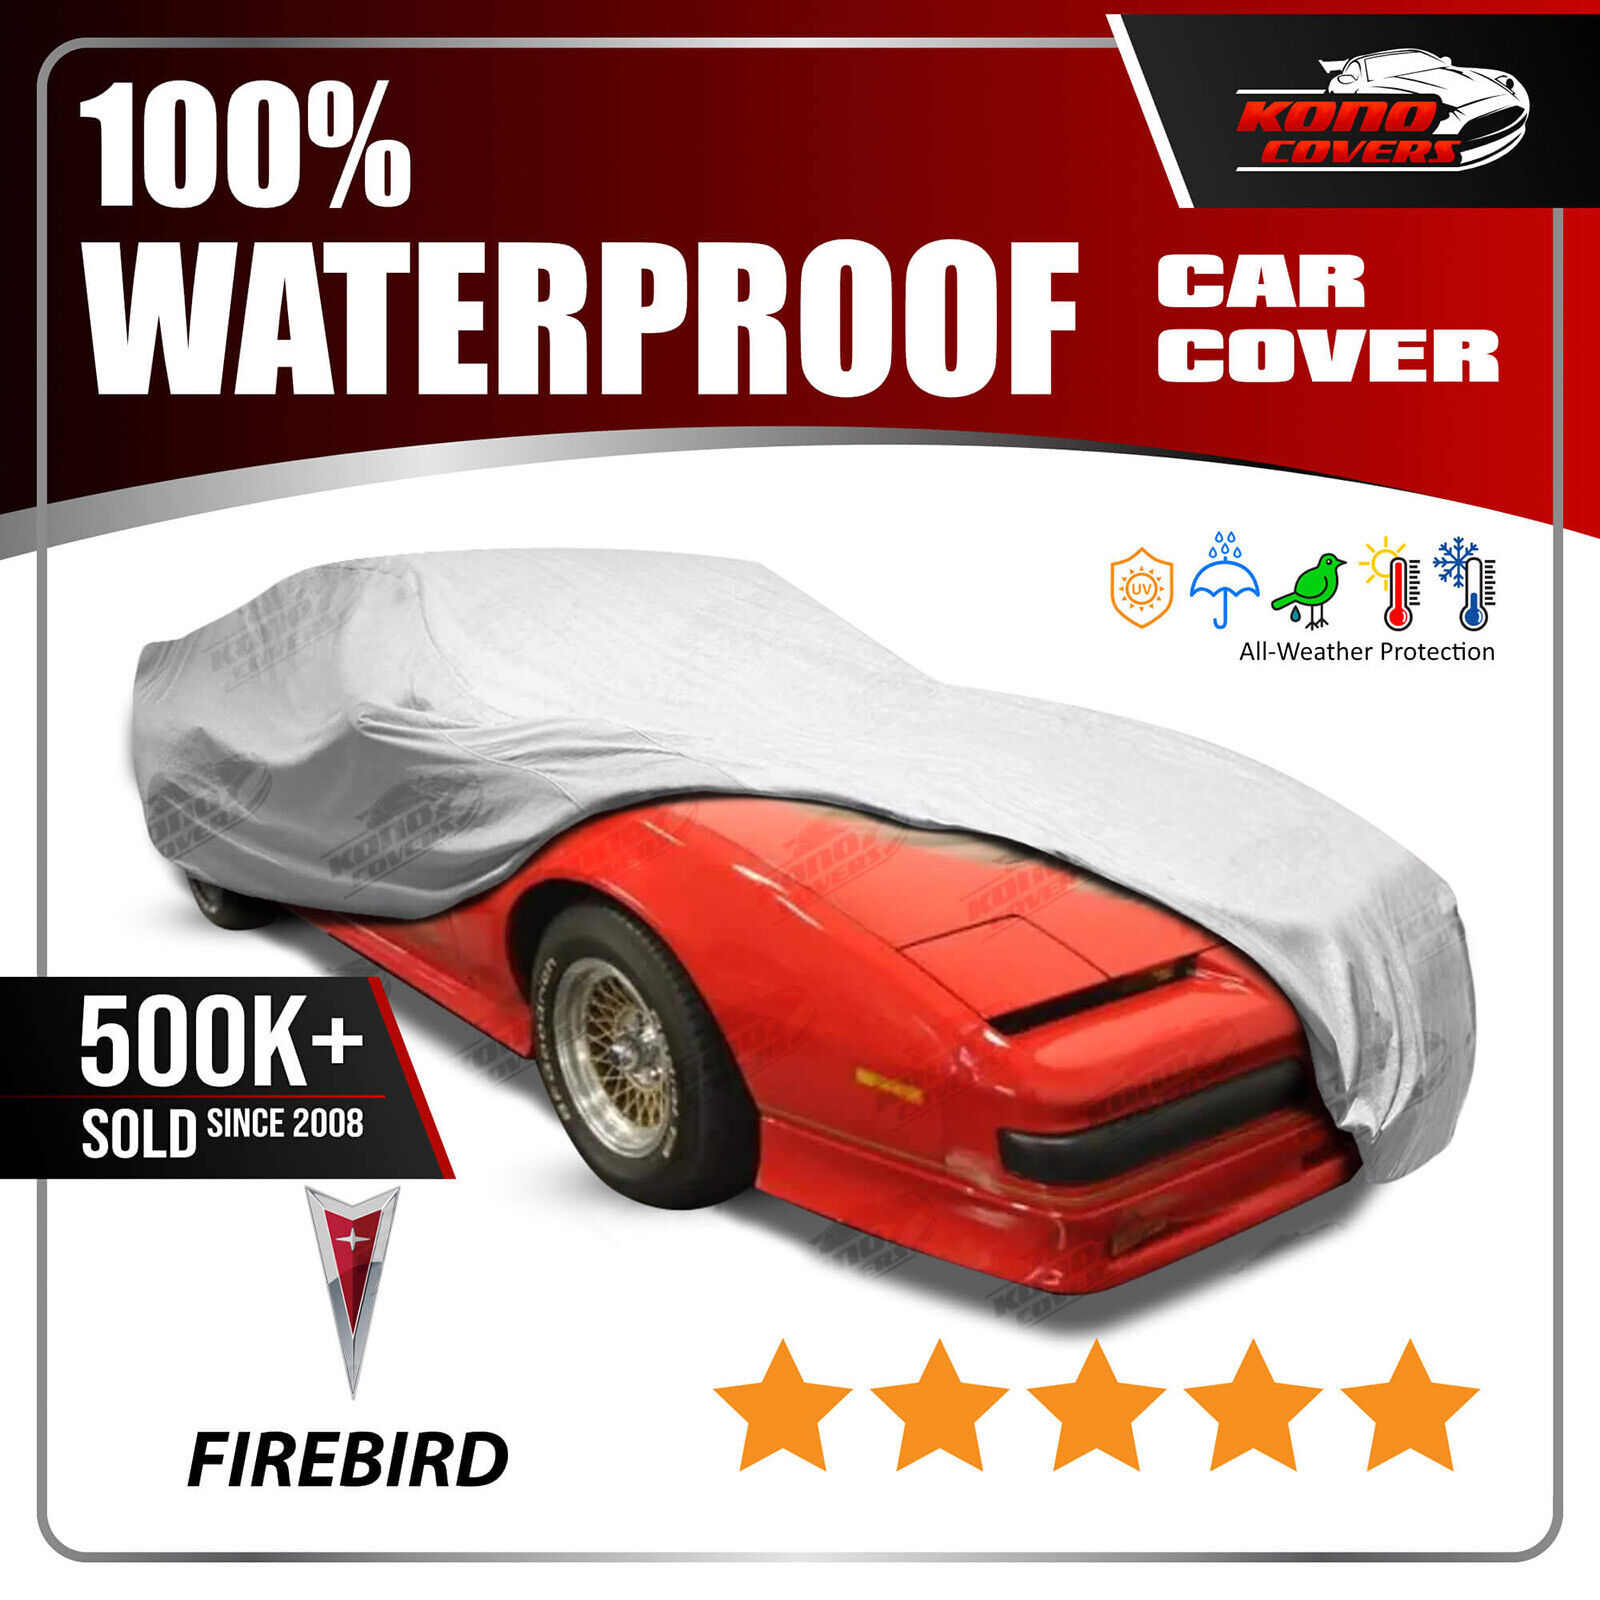 [PONTIAC FIREBIRD] CAR COVER - Ultimate Full Custom-Fit All Weather Protection